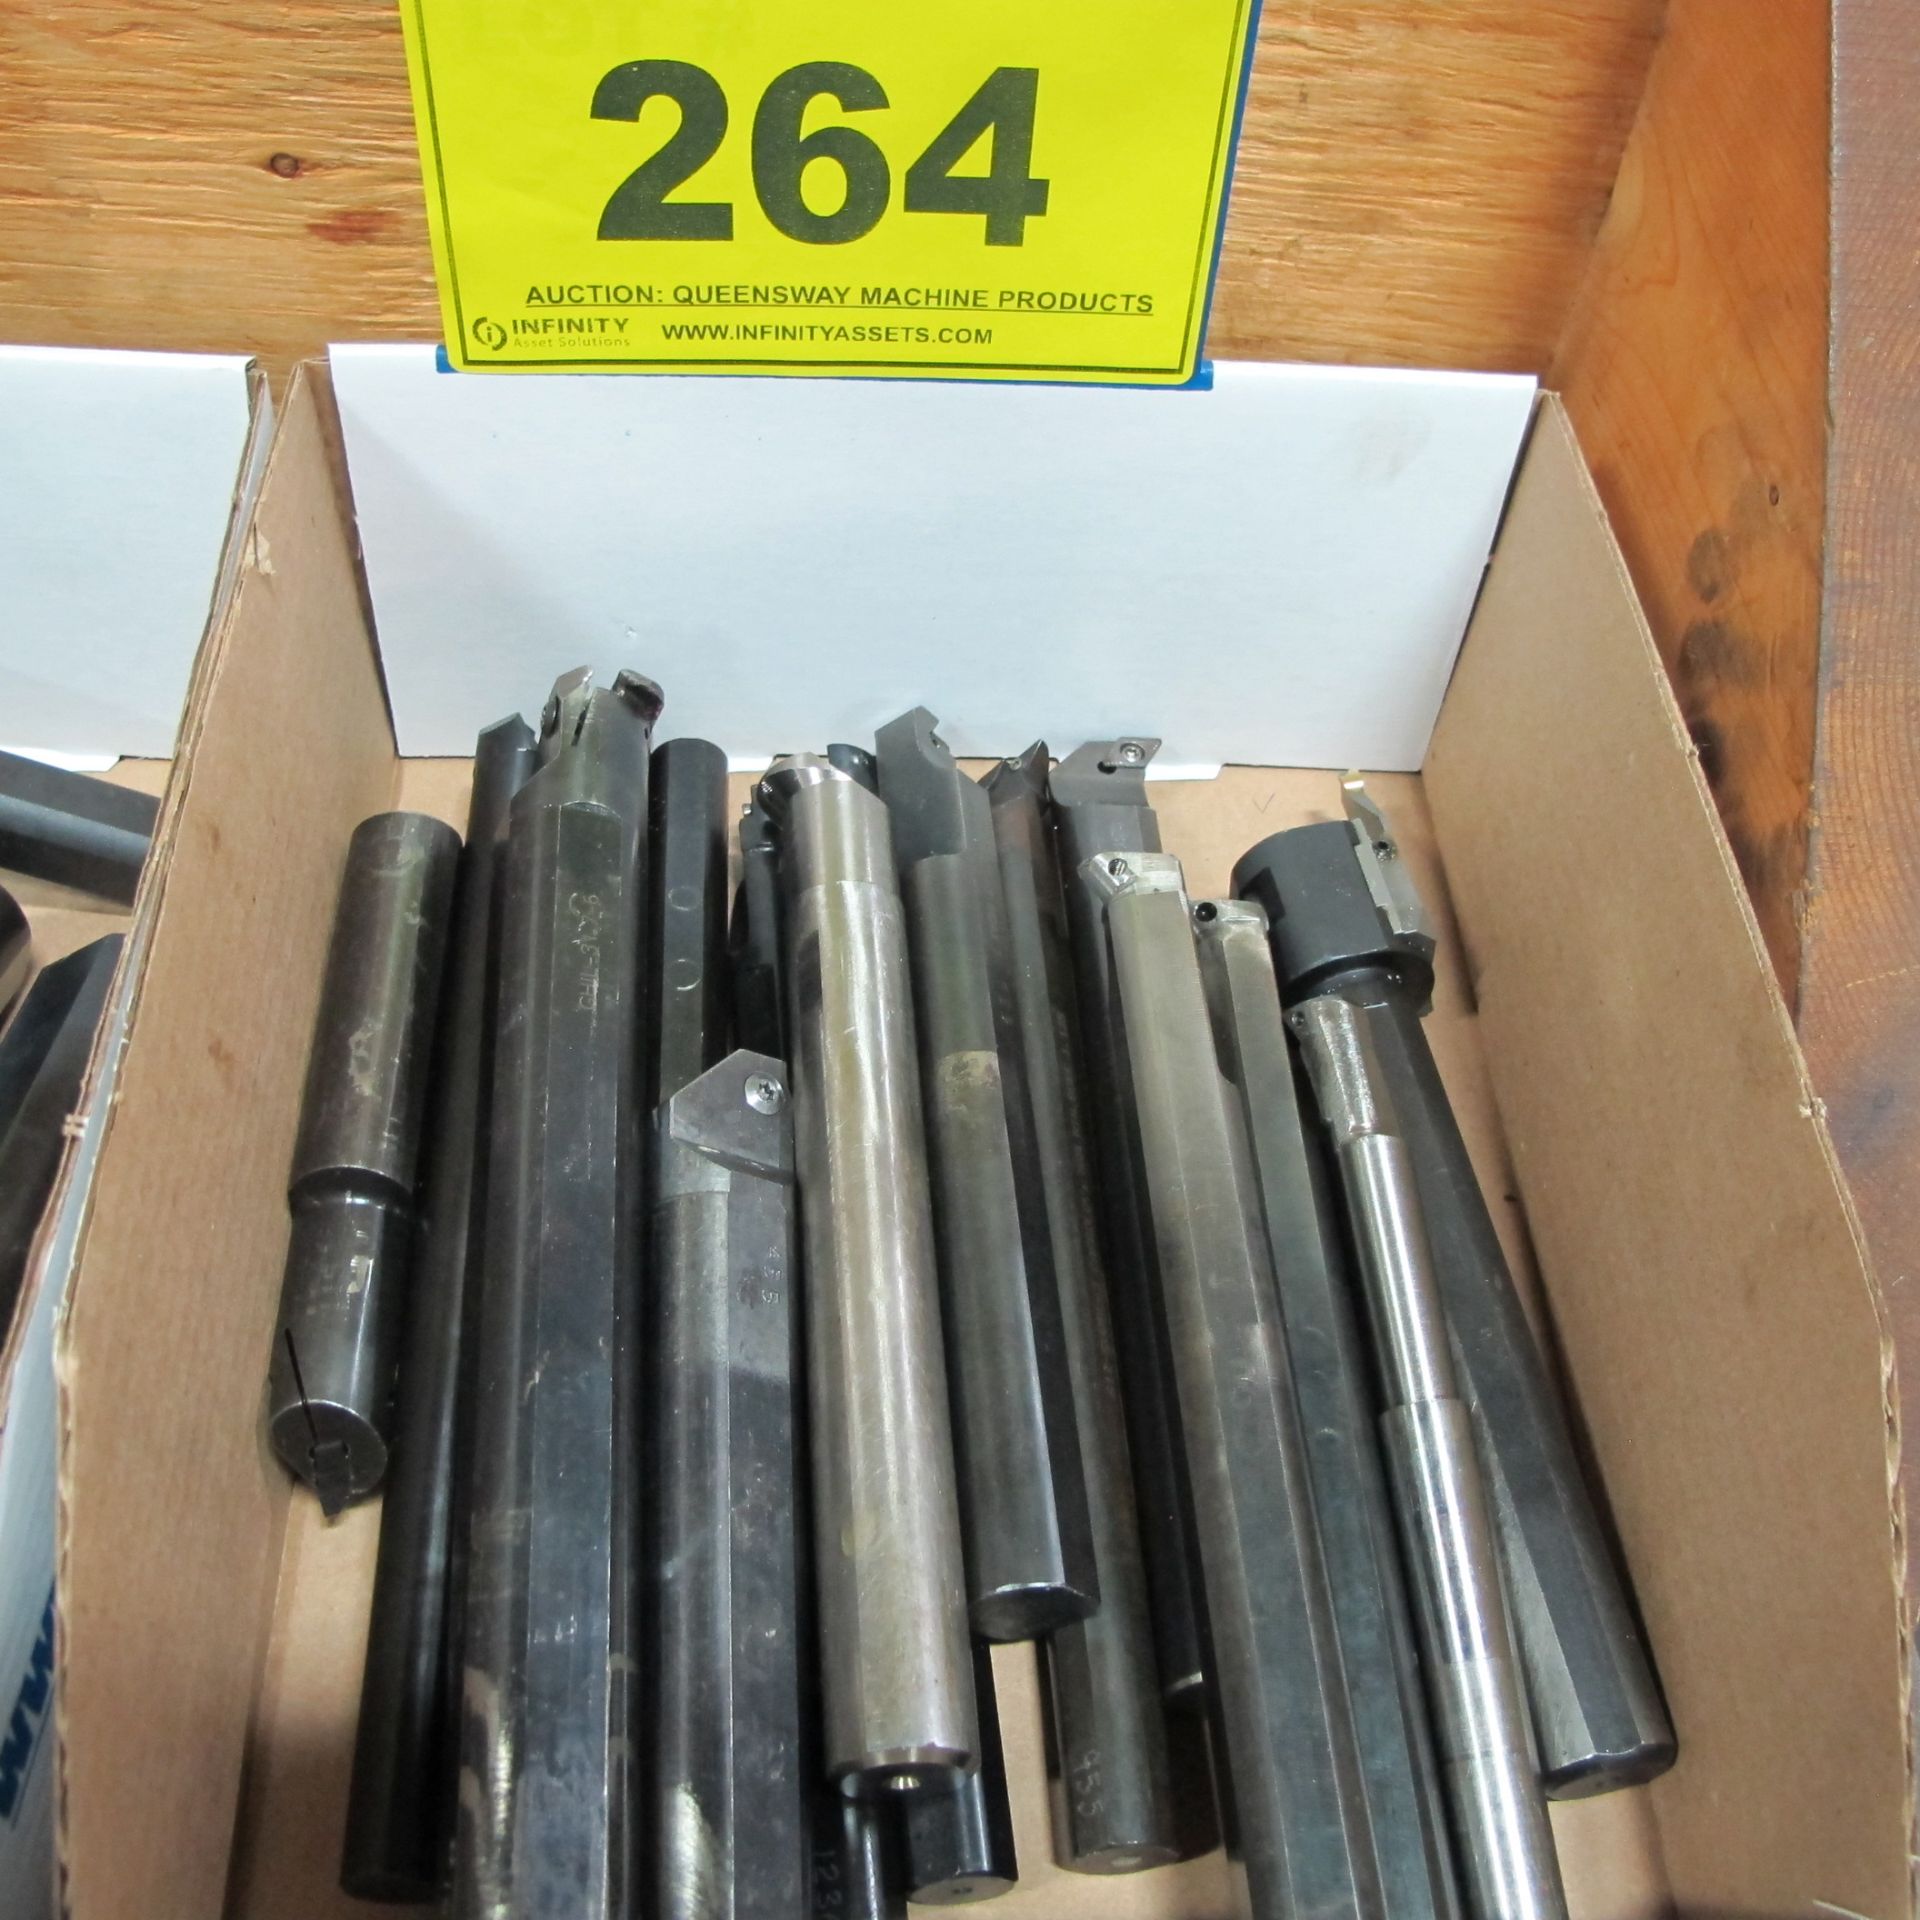 BOX OF TOOL BARS W/ CARBIDE CUTTERS